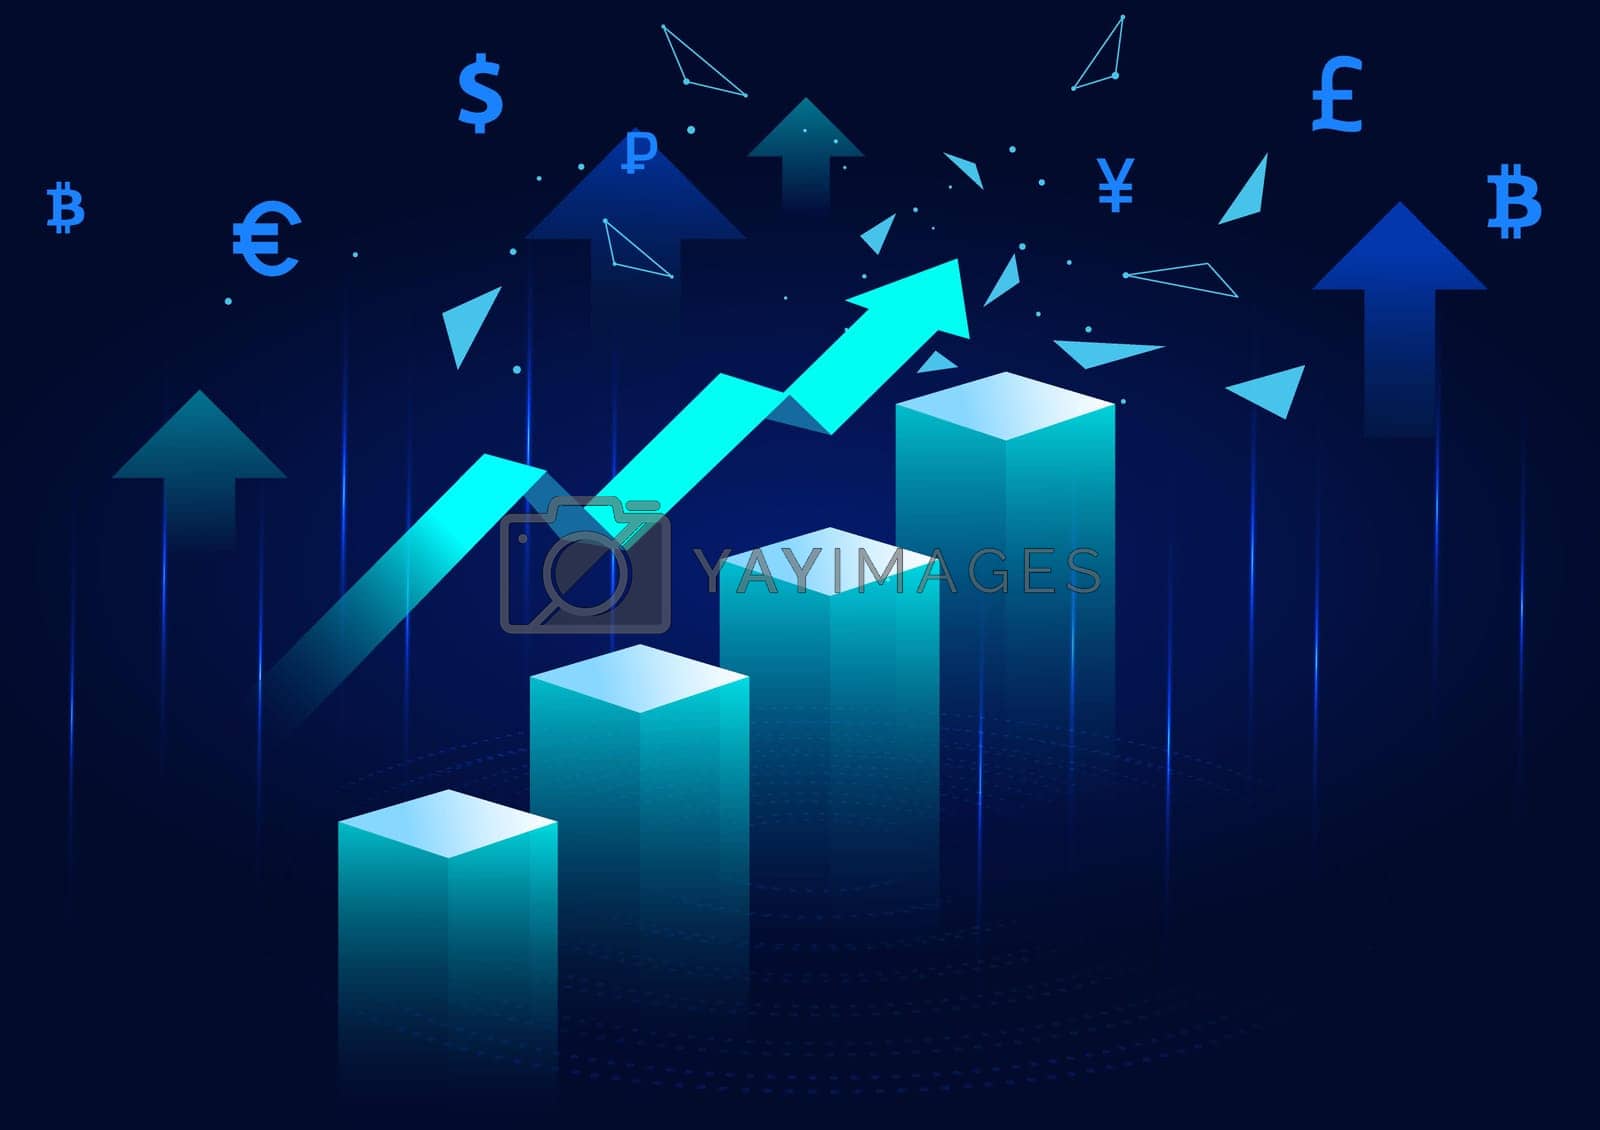 Royalty free image of Financial stock market increase profit graph and digital line. Decentralized from defi and nft game economy gain price concept. Cyberpunk and futuristic city theme color. by chanwitya28